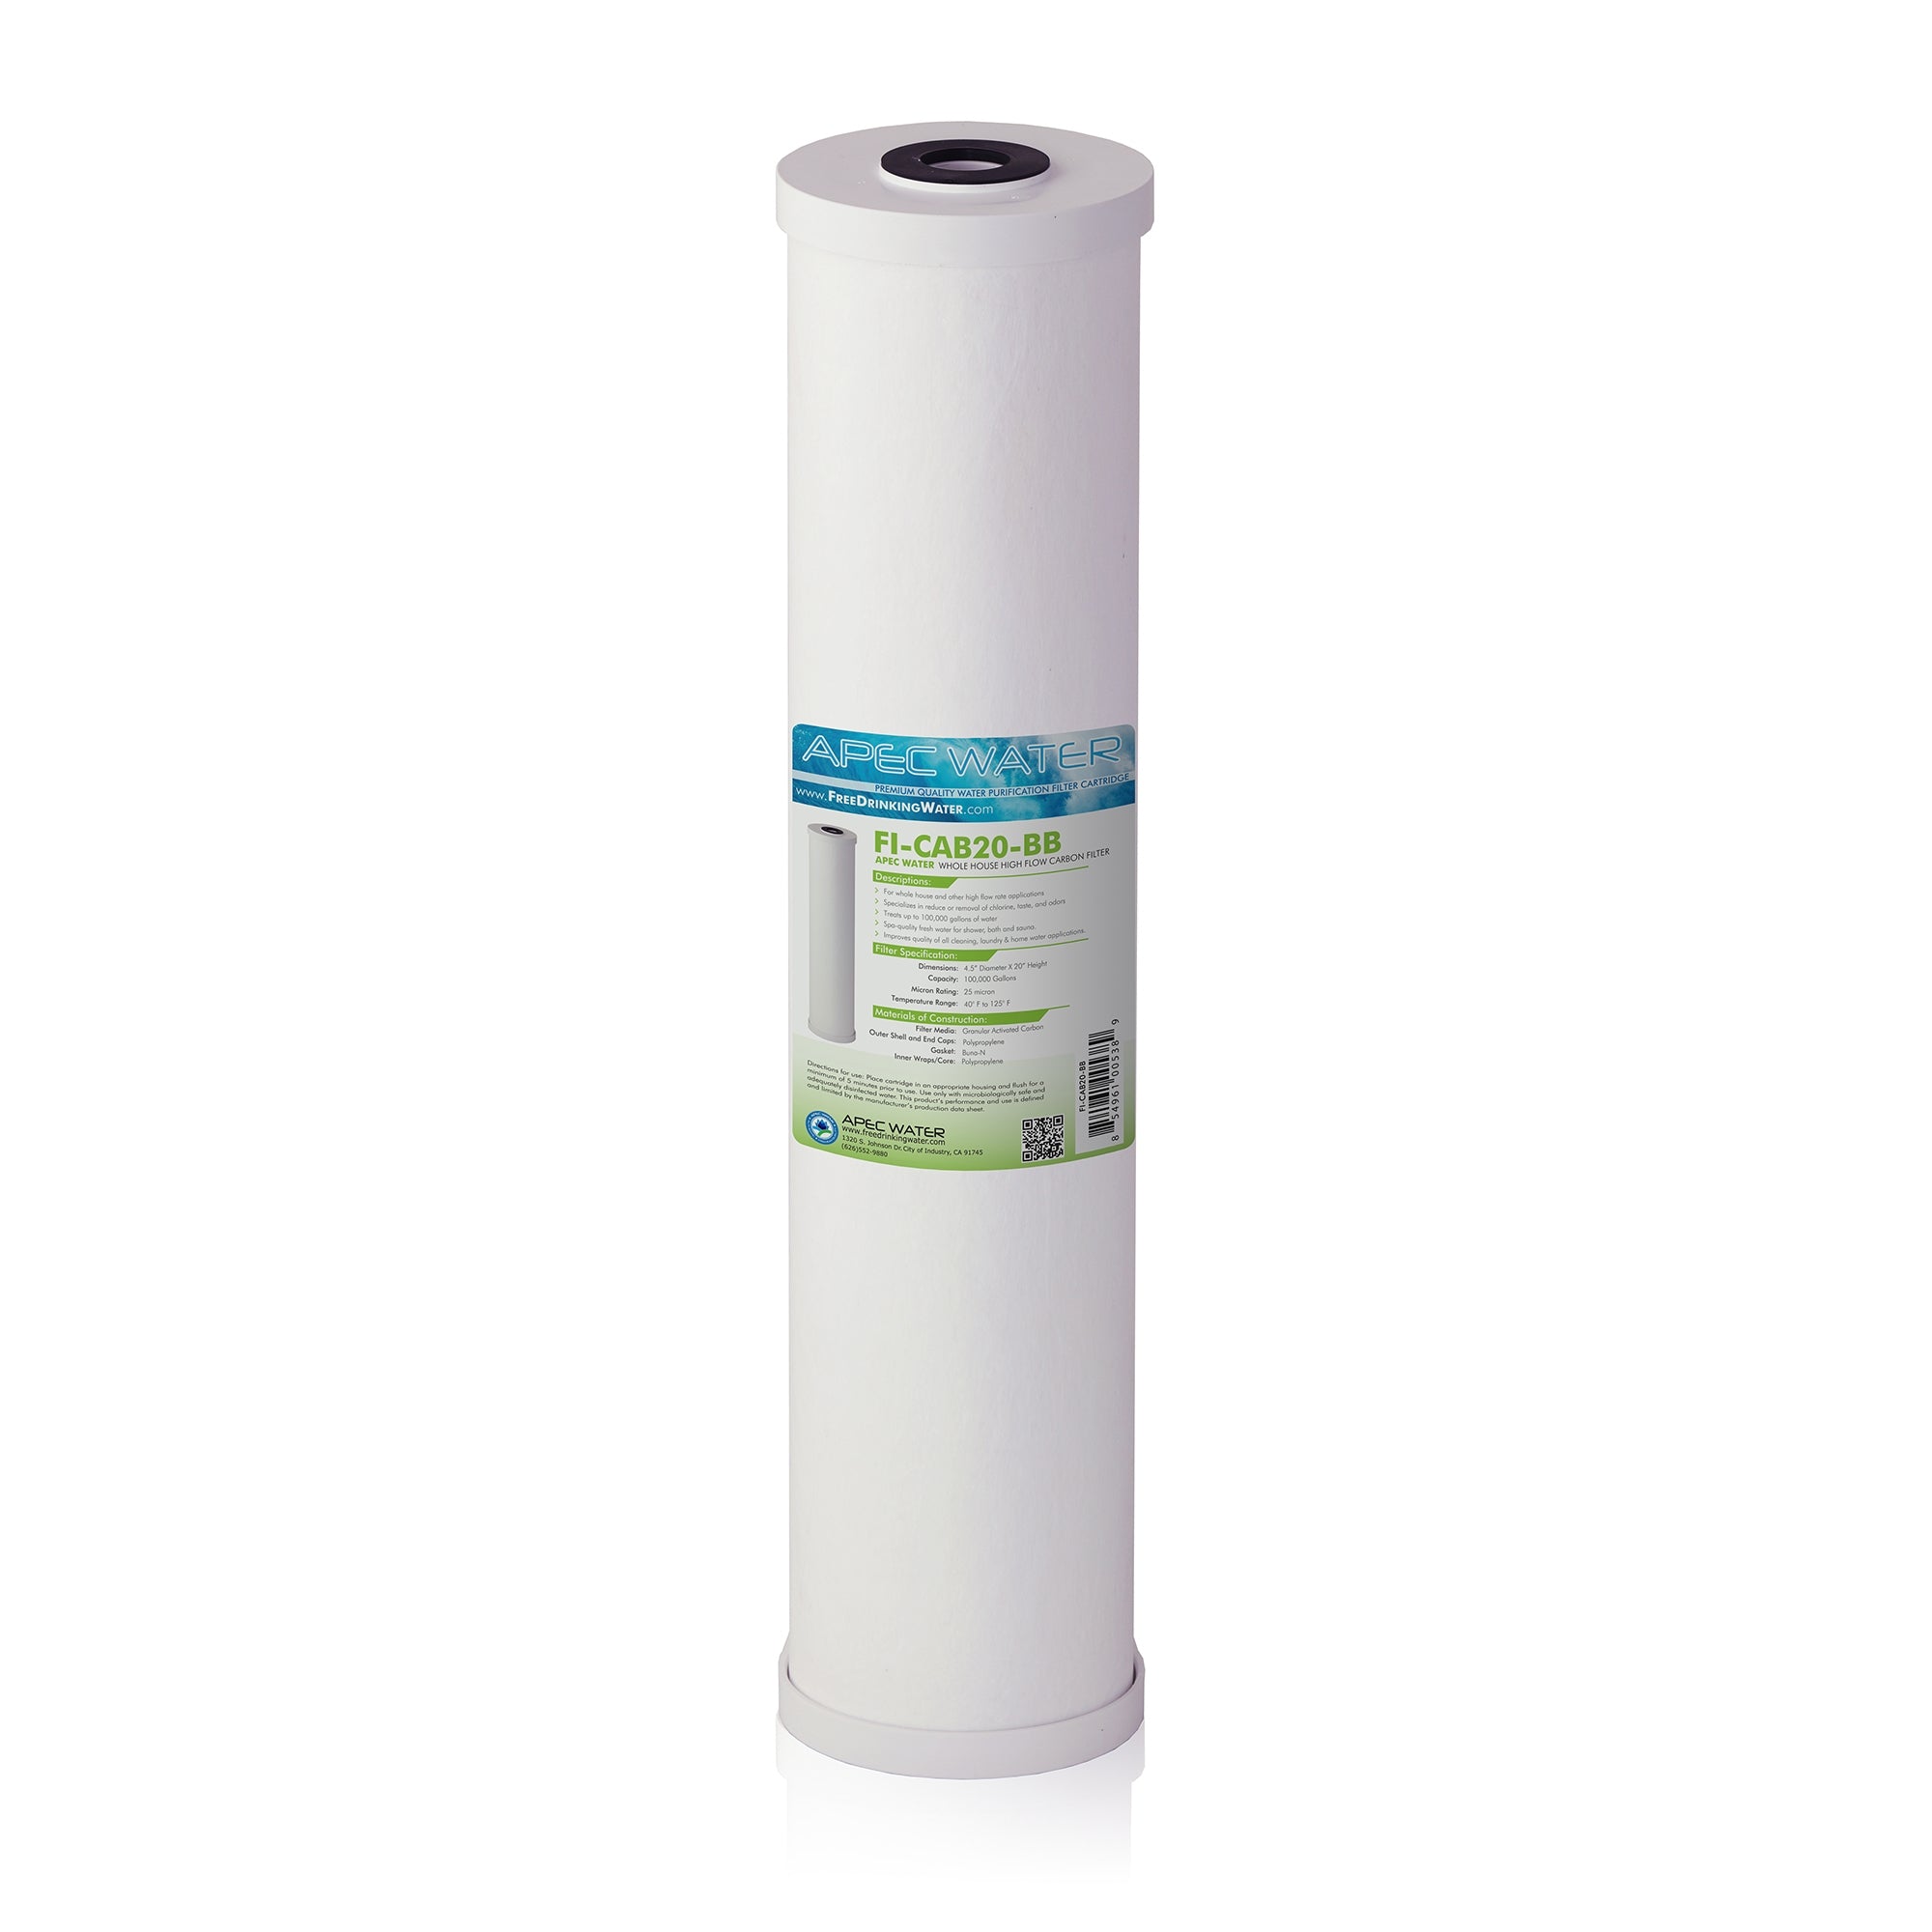 Whole House High Flow Radial-Flow GAC Carbon Filter 4.5"x 20 Inch, 25 Micron